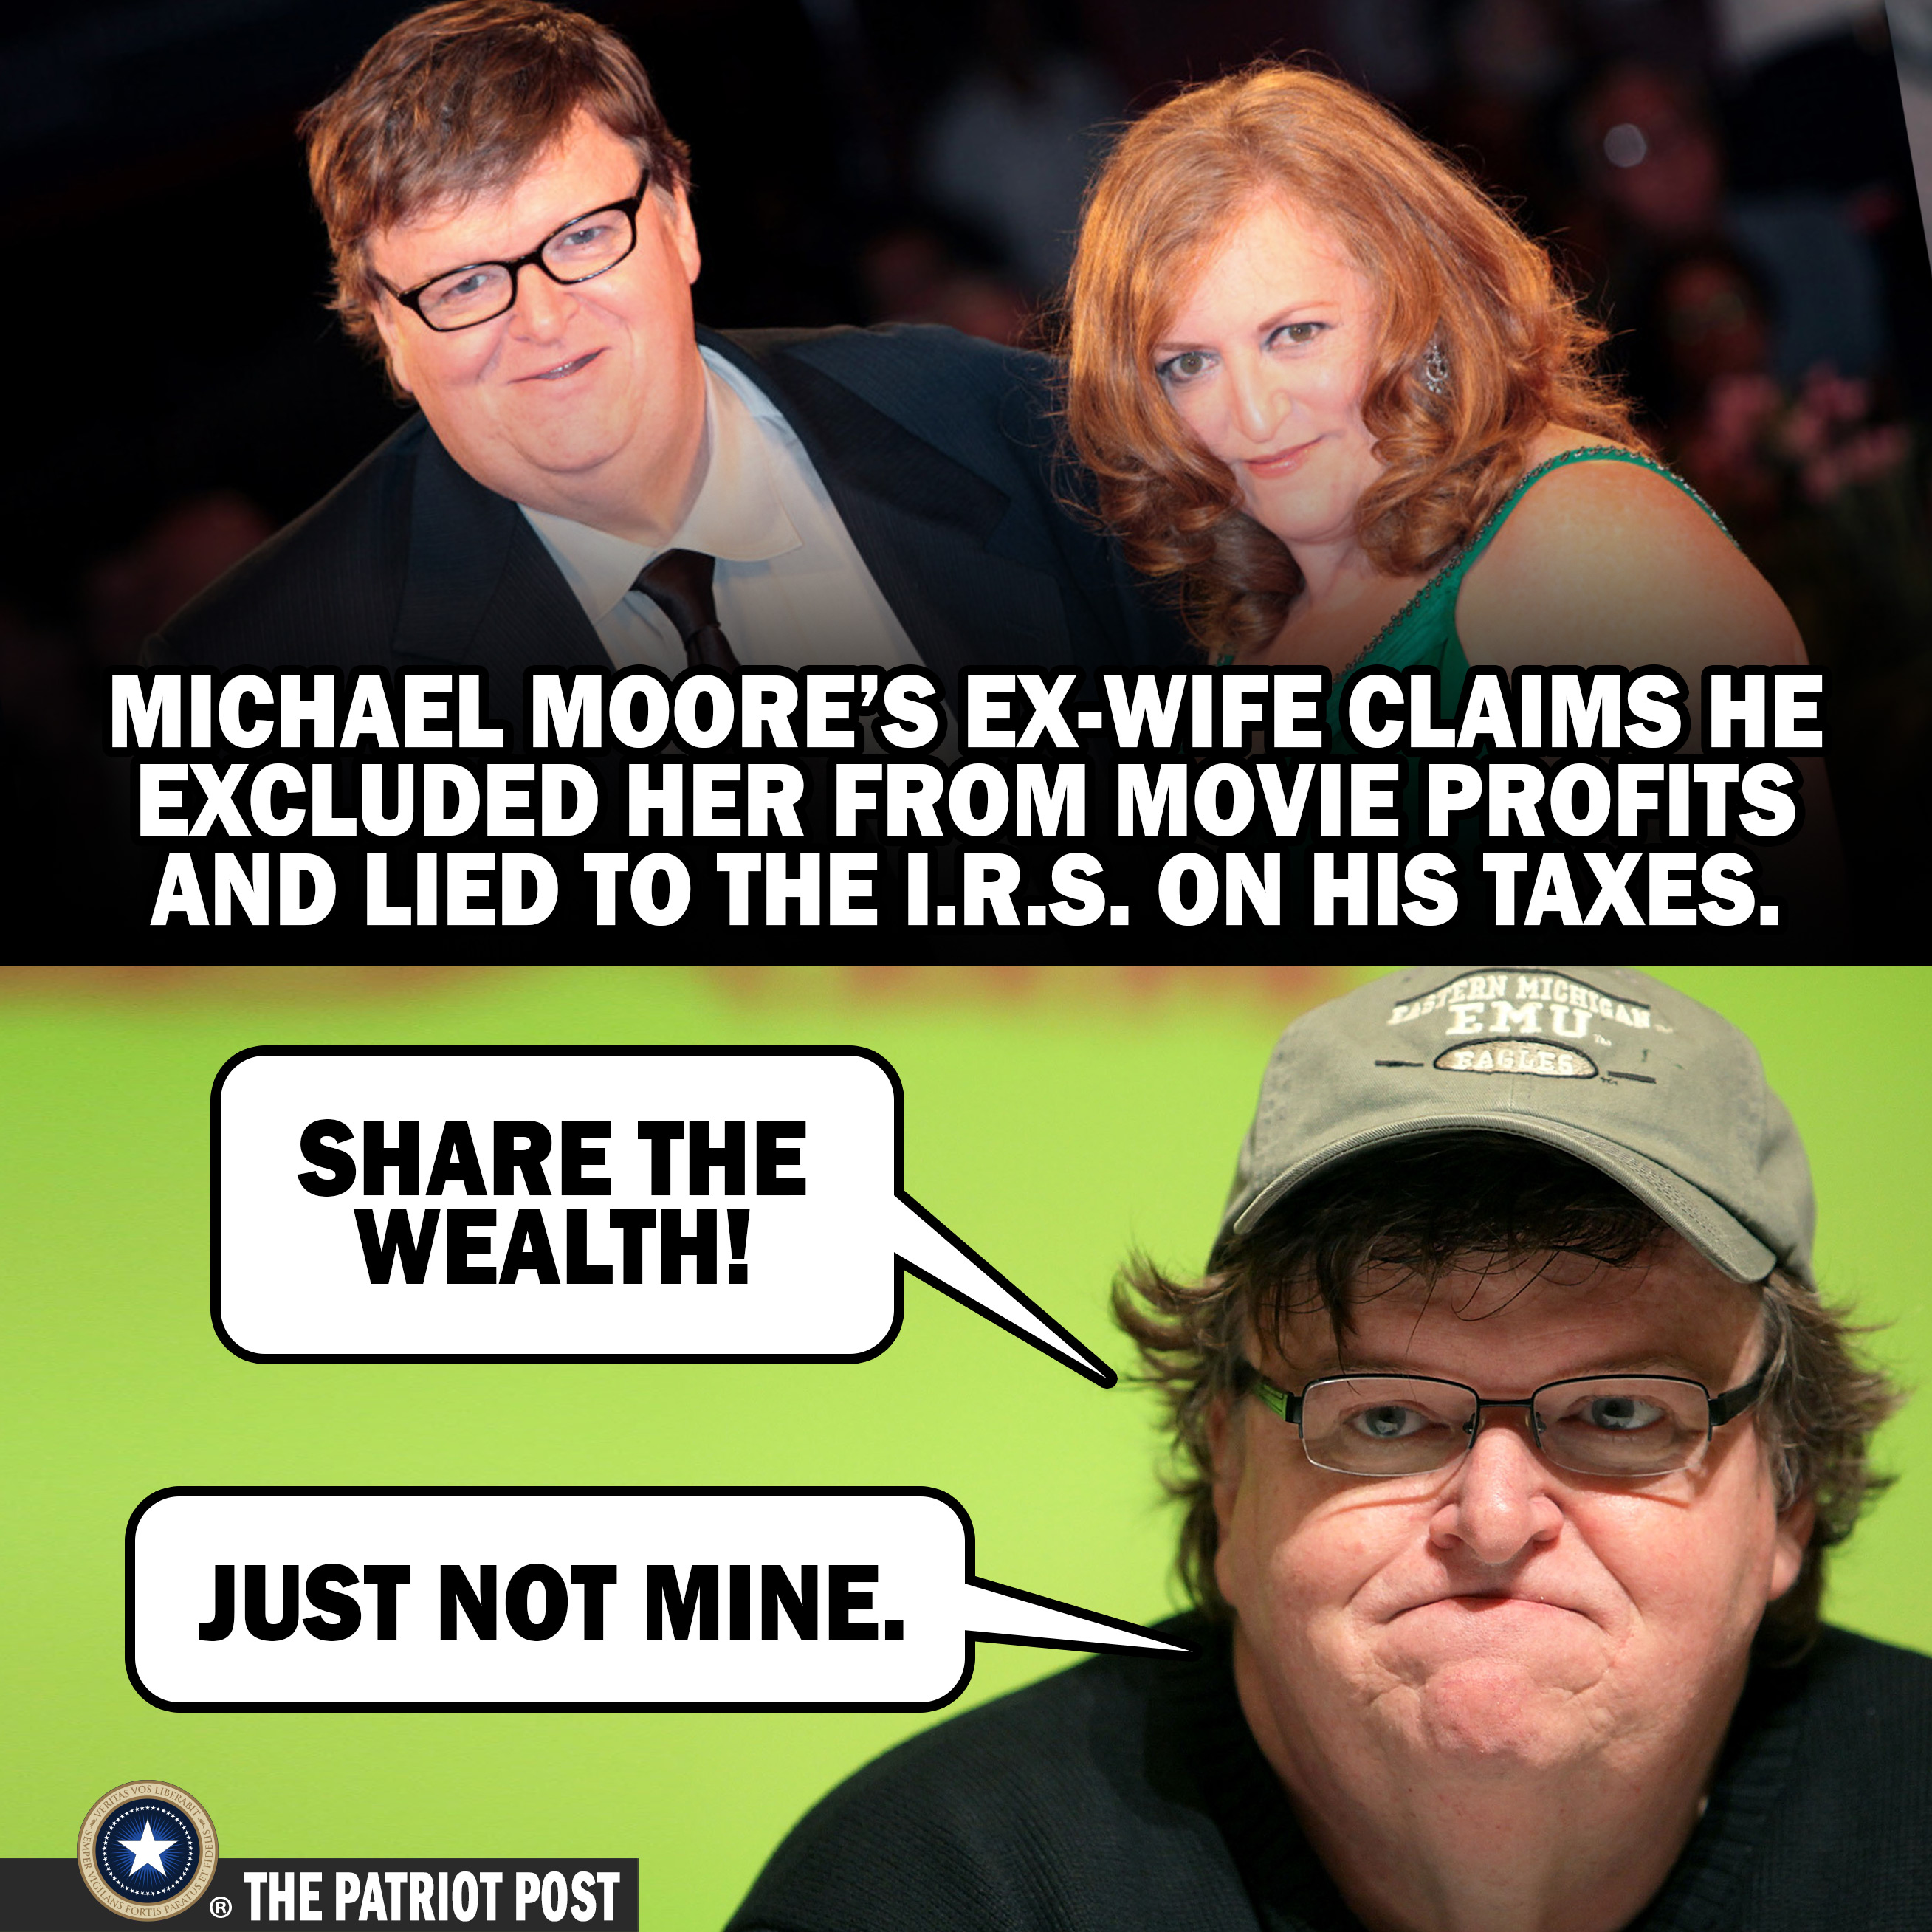 political meme photo caption - Michael Moore'S ExWife Claims He Excluded Her From Movie Profits And Lied To The I.R.S. On His Taxes. The Wealth! Just Not Mine. The Patriot Post